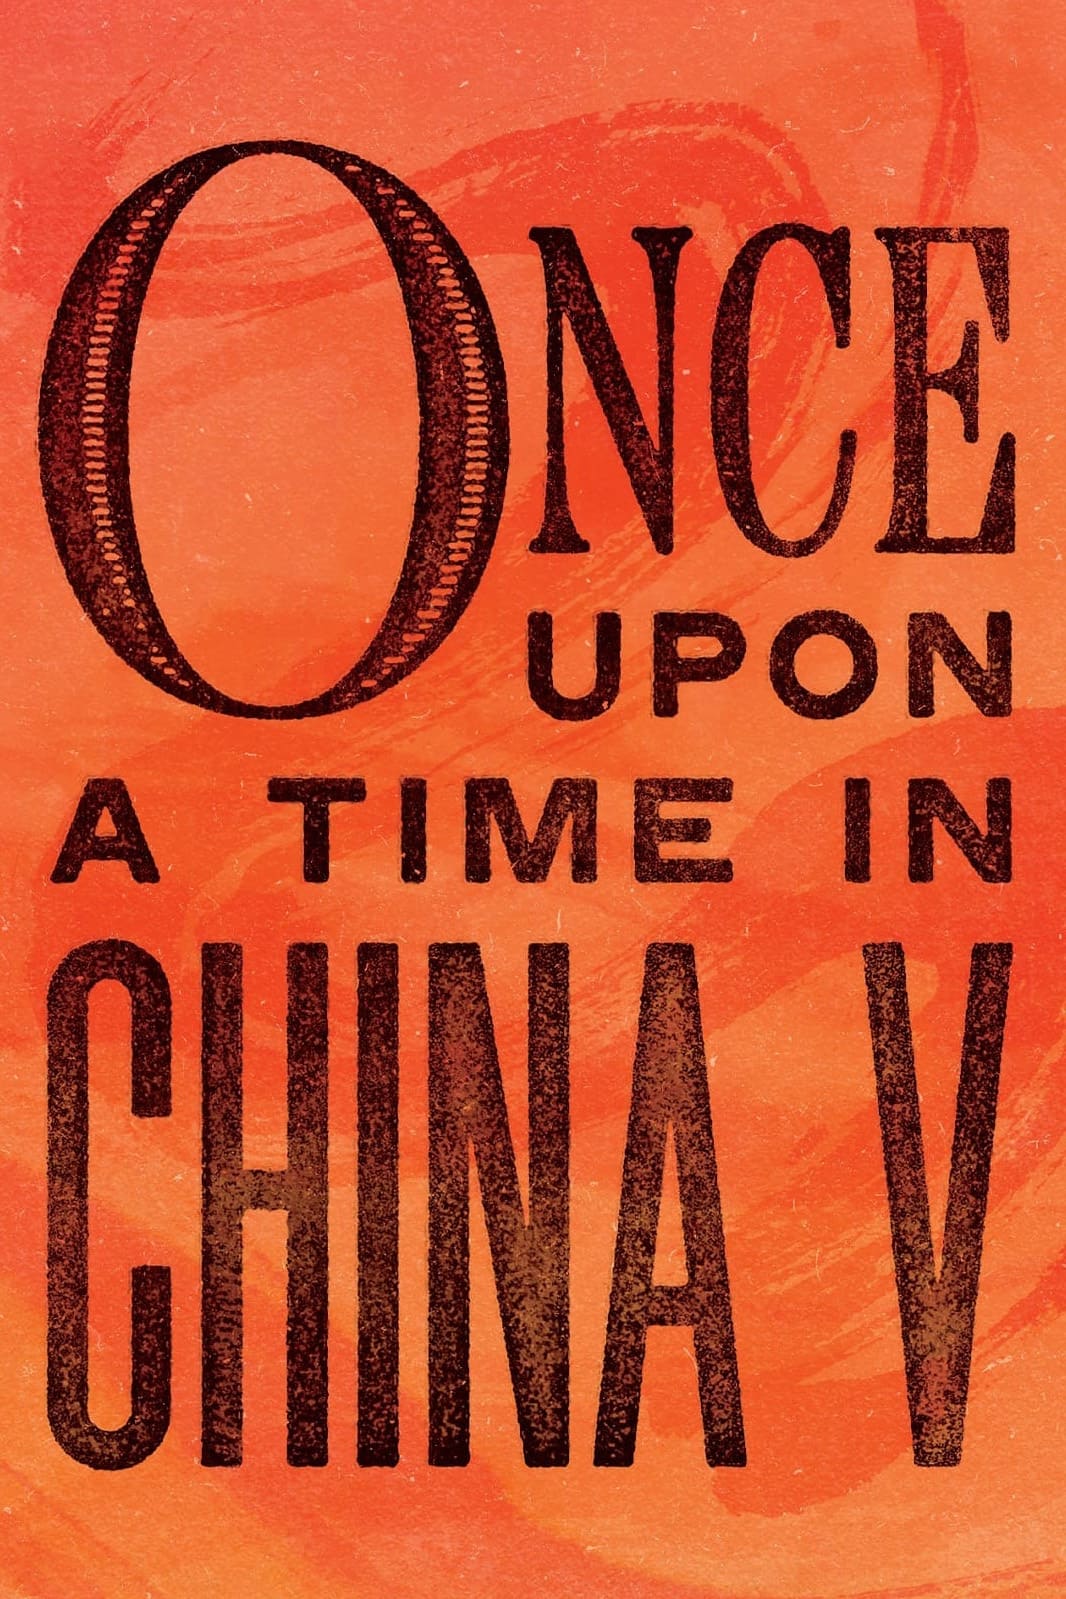 Once Upon a Time in China V (1994)